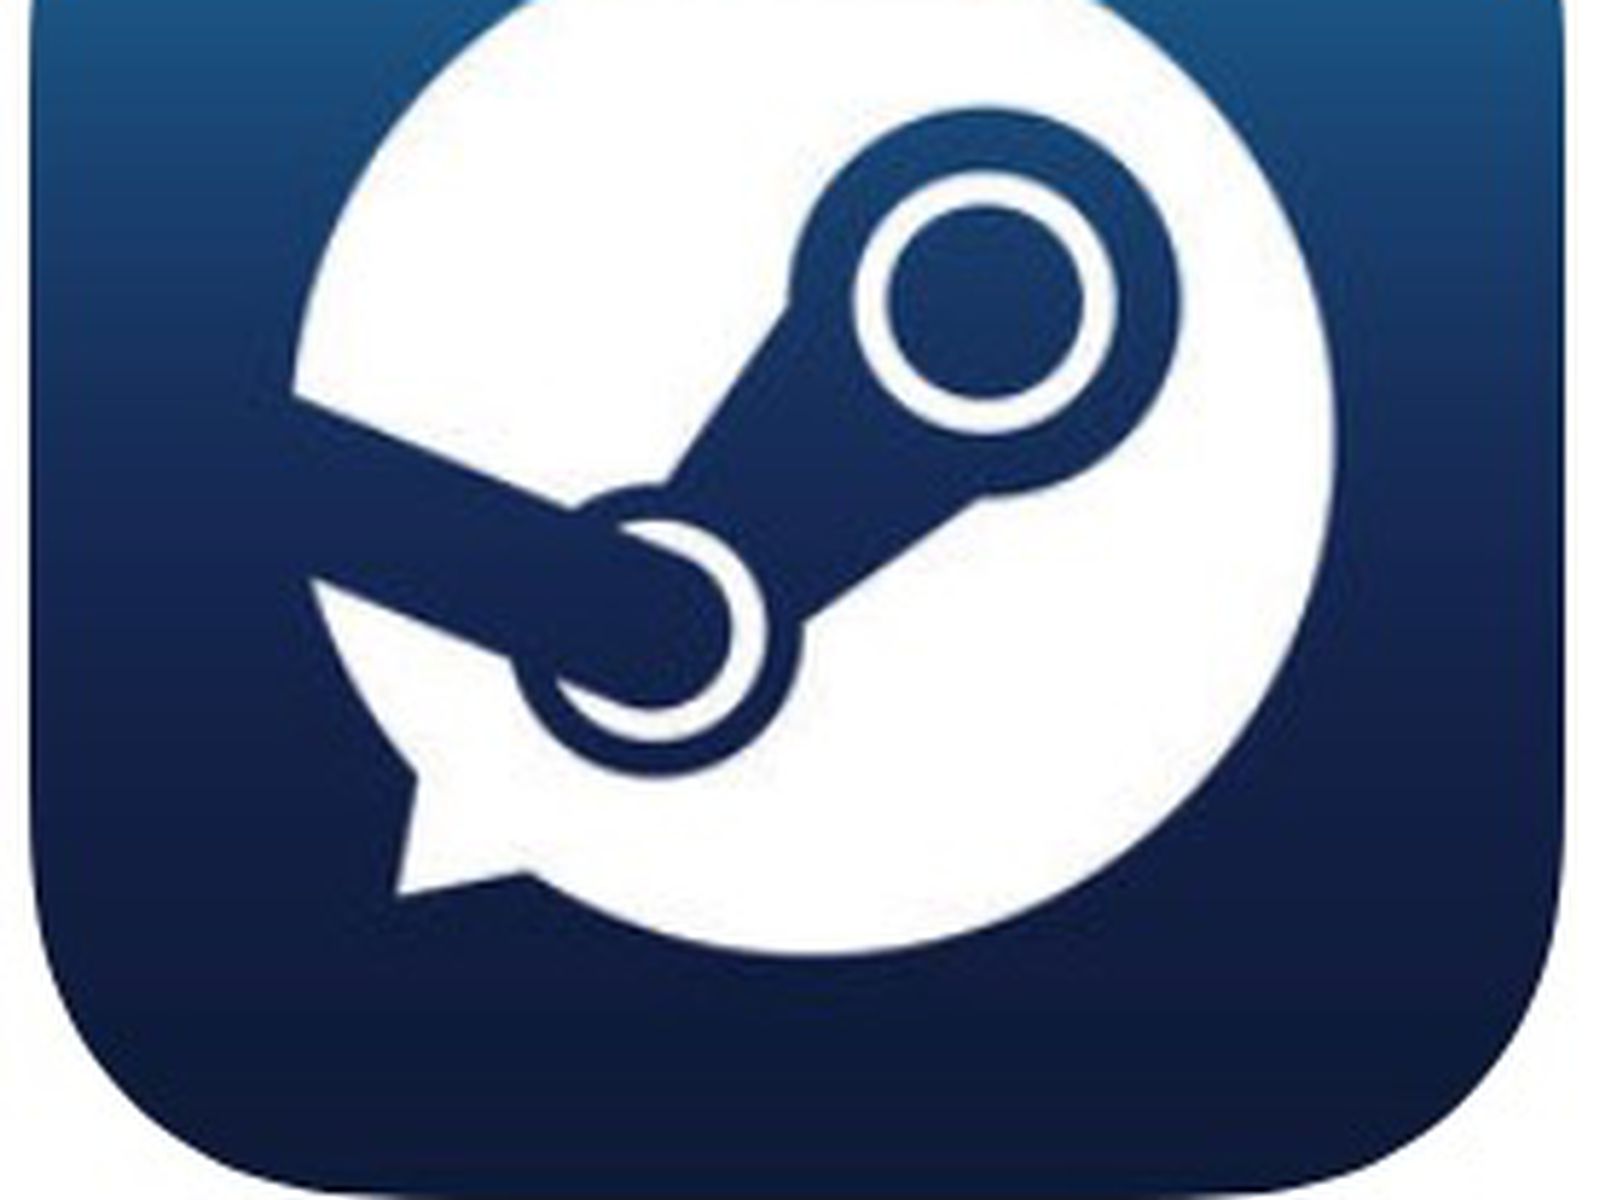 how to use ps4 controller on steam os streaming